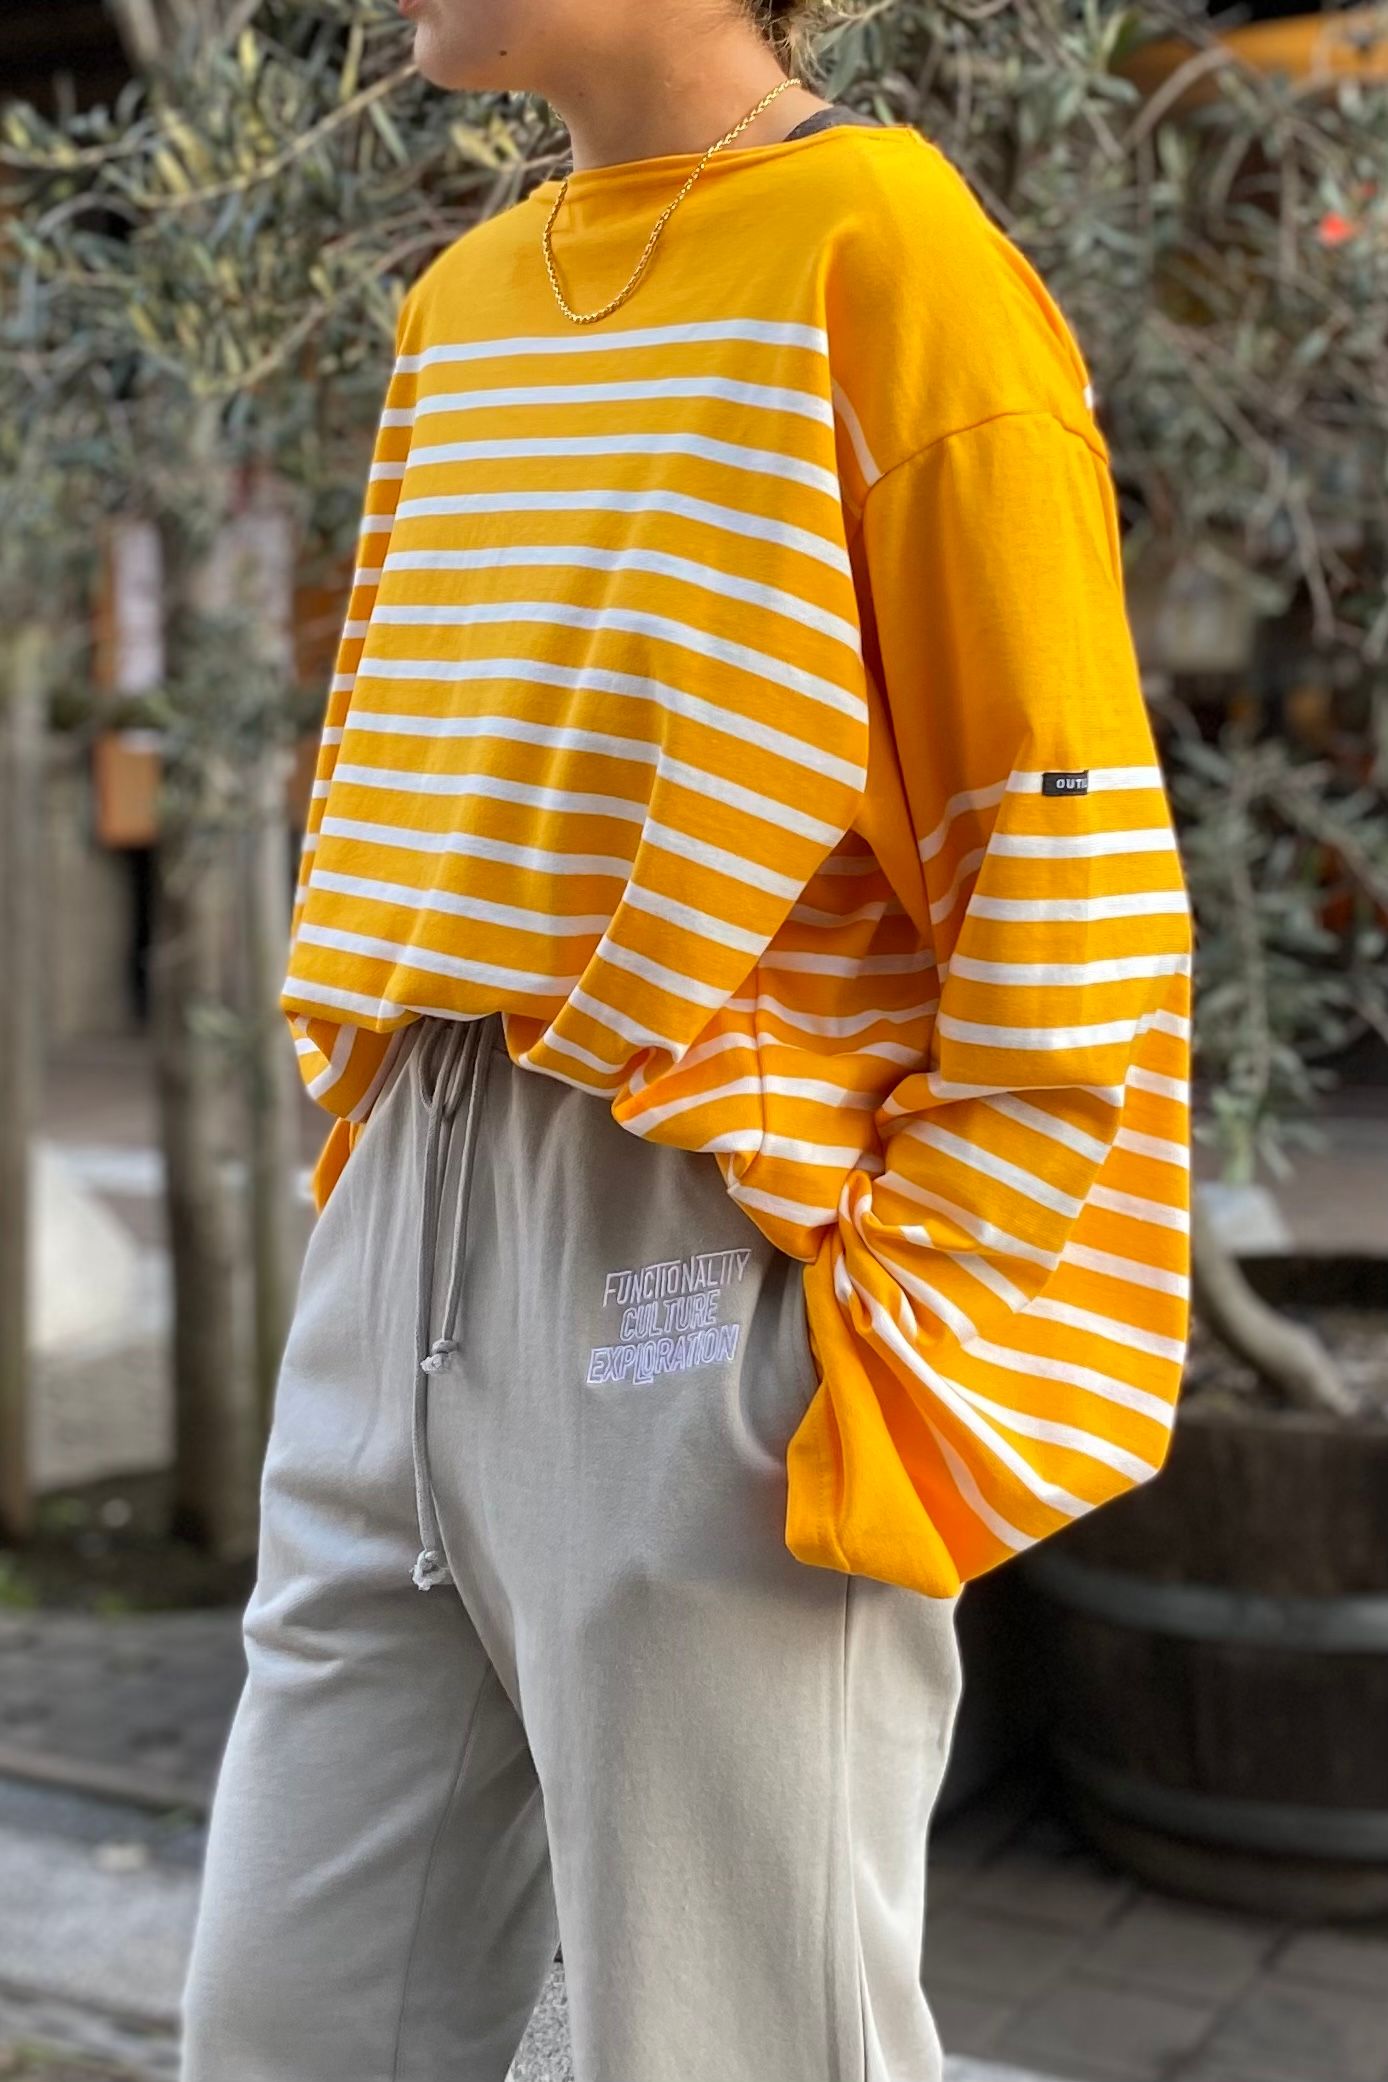 OUTIL - バスクシャツ/tricot aast -bright marigold/off- 23ss unisex | asterisk